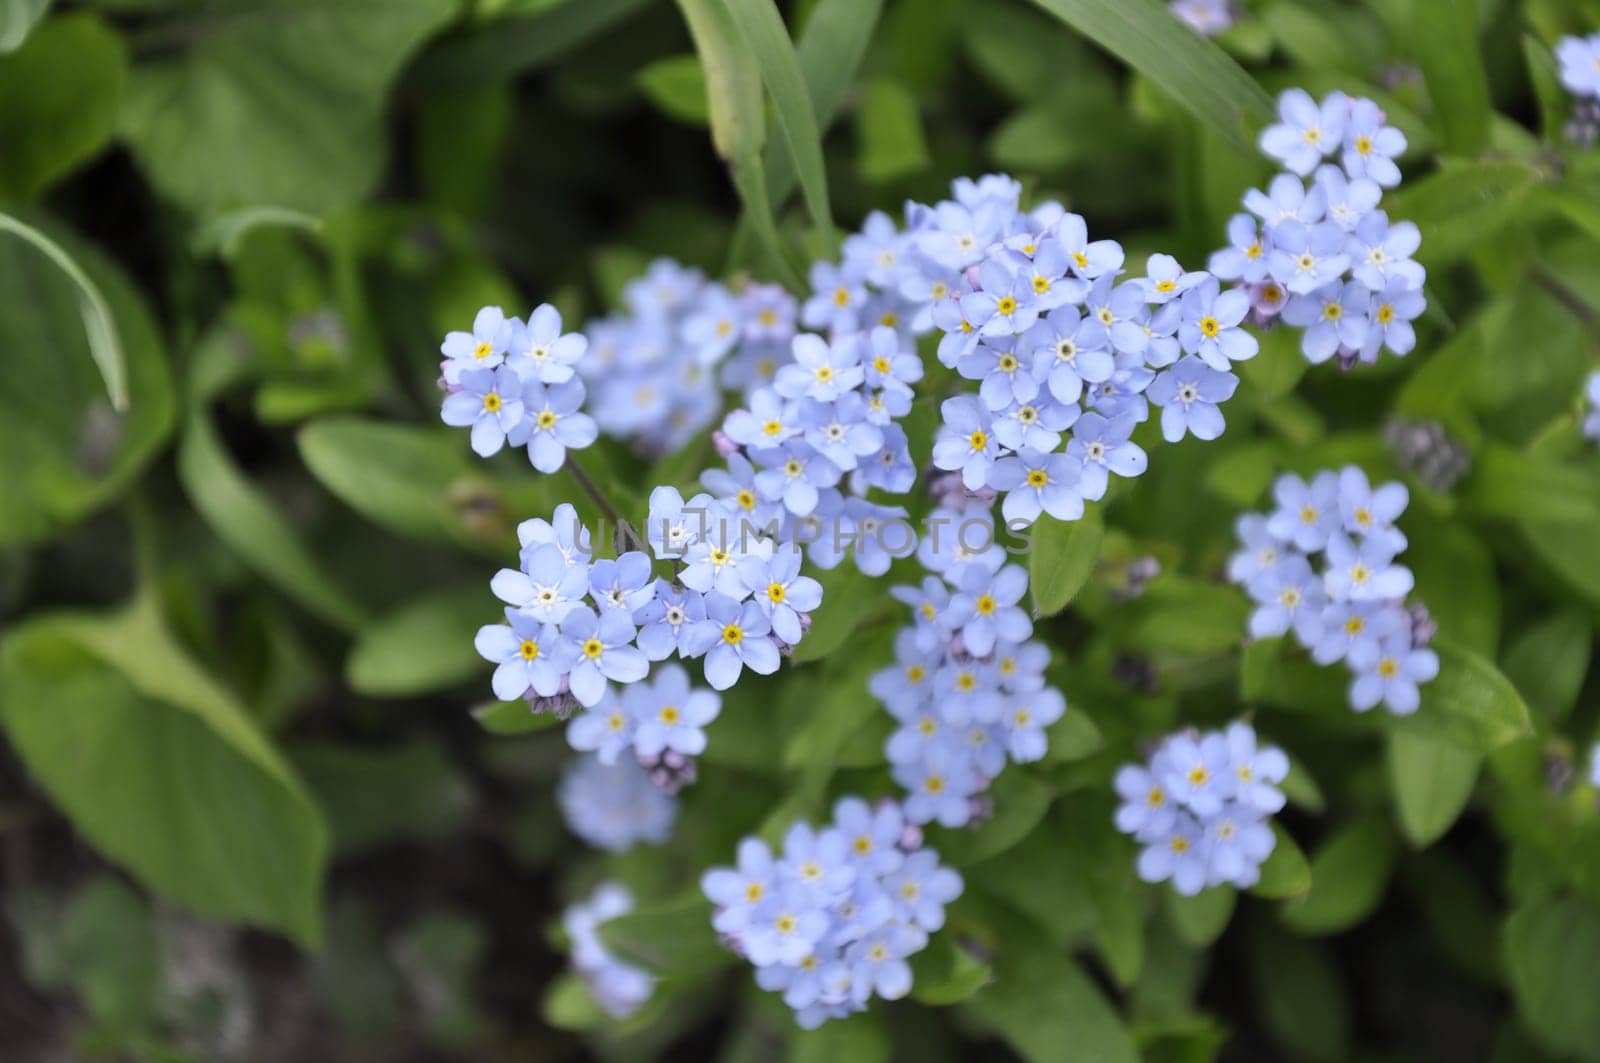 Blue forget-me-not flowers. The first spring flowers. by AliaksaB